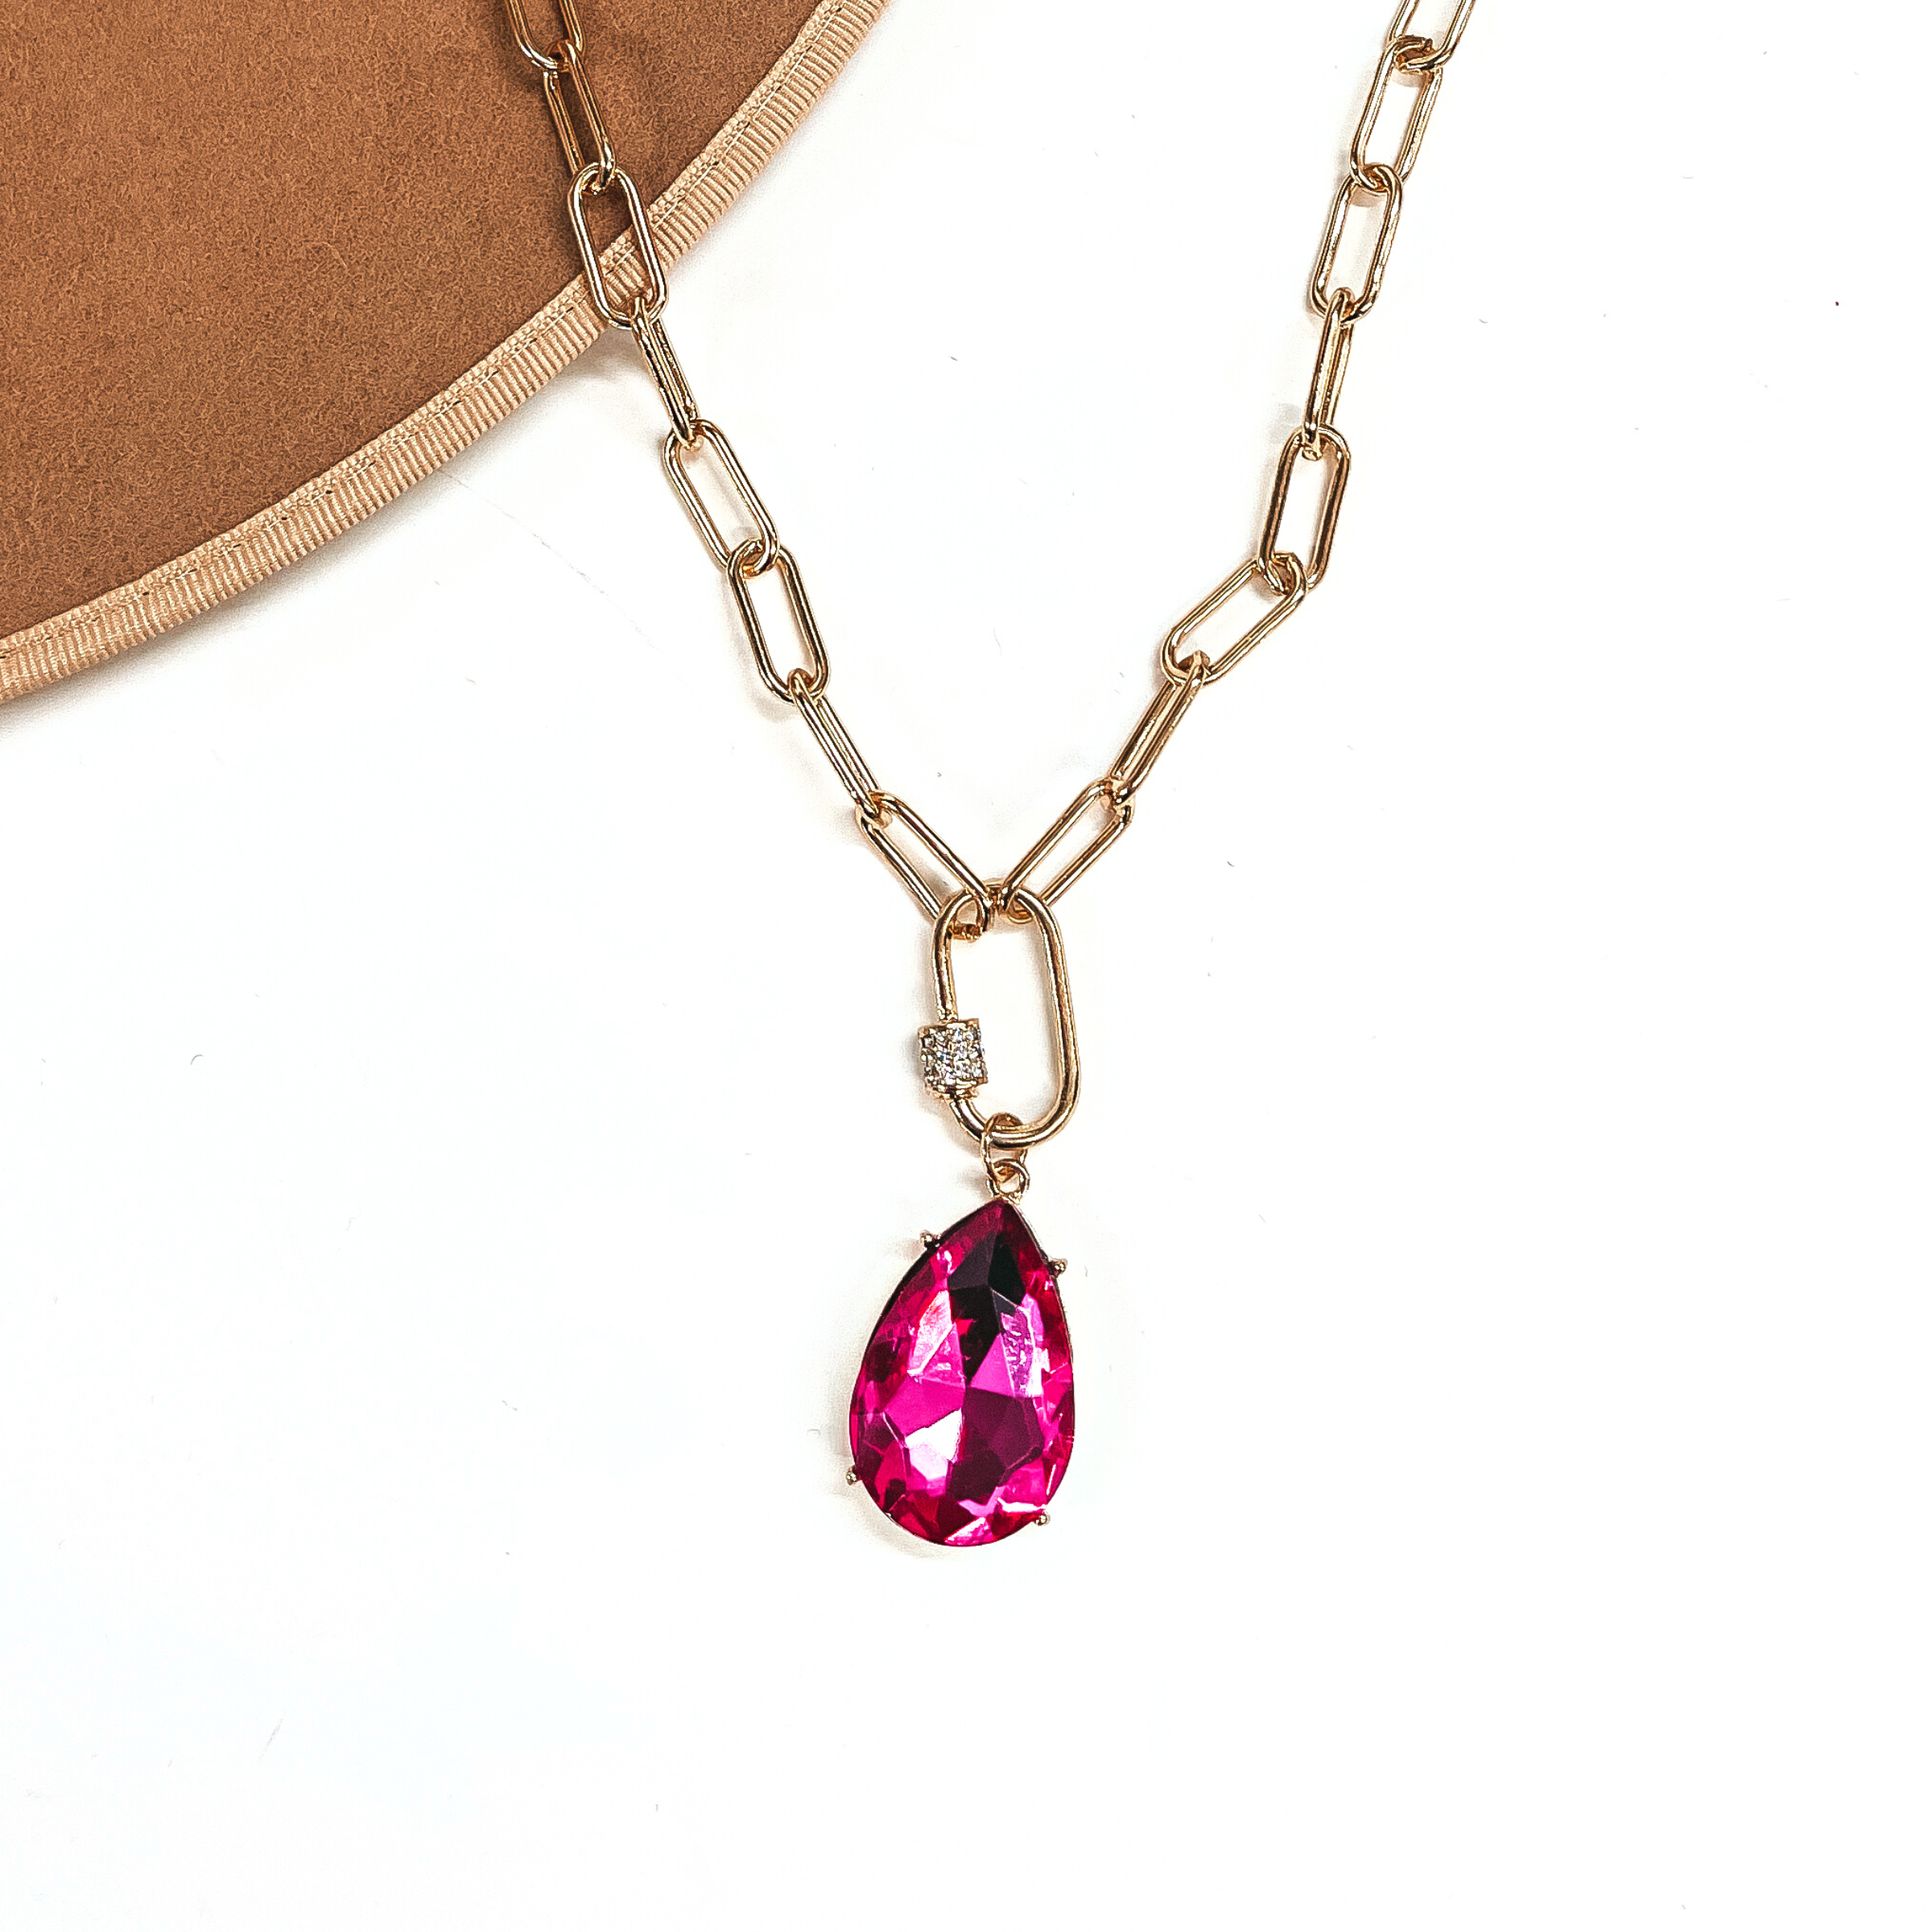 This is a large gold tone link chain necklace with a link connector and a large  fuchsia crystal teardrop. The link connector has a small band of small clear  crystals. This necklace is taken laying on a brown felt hat brim and on a white  background.